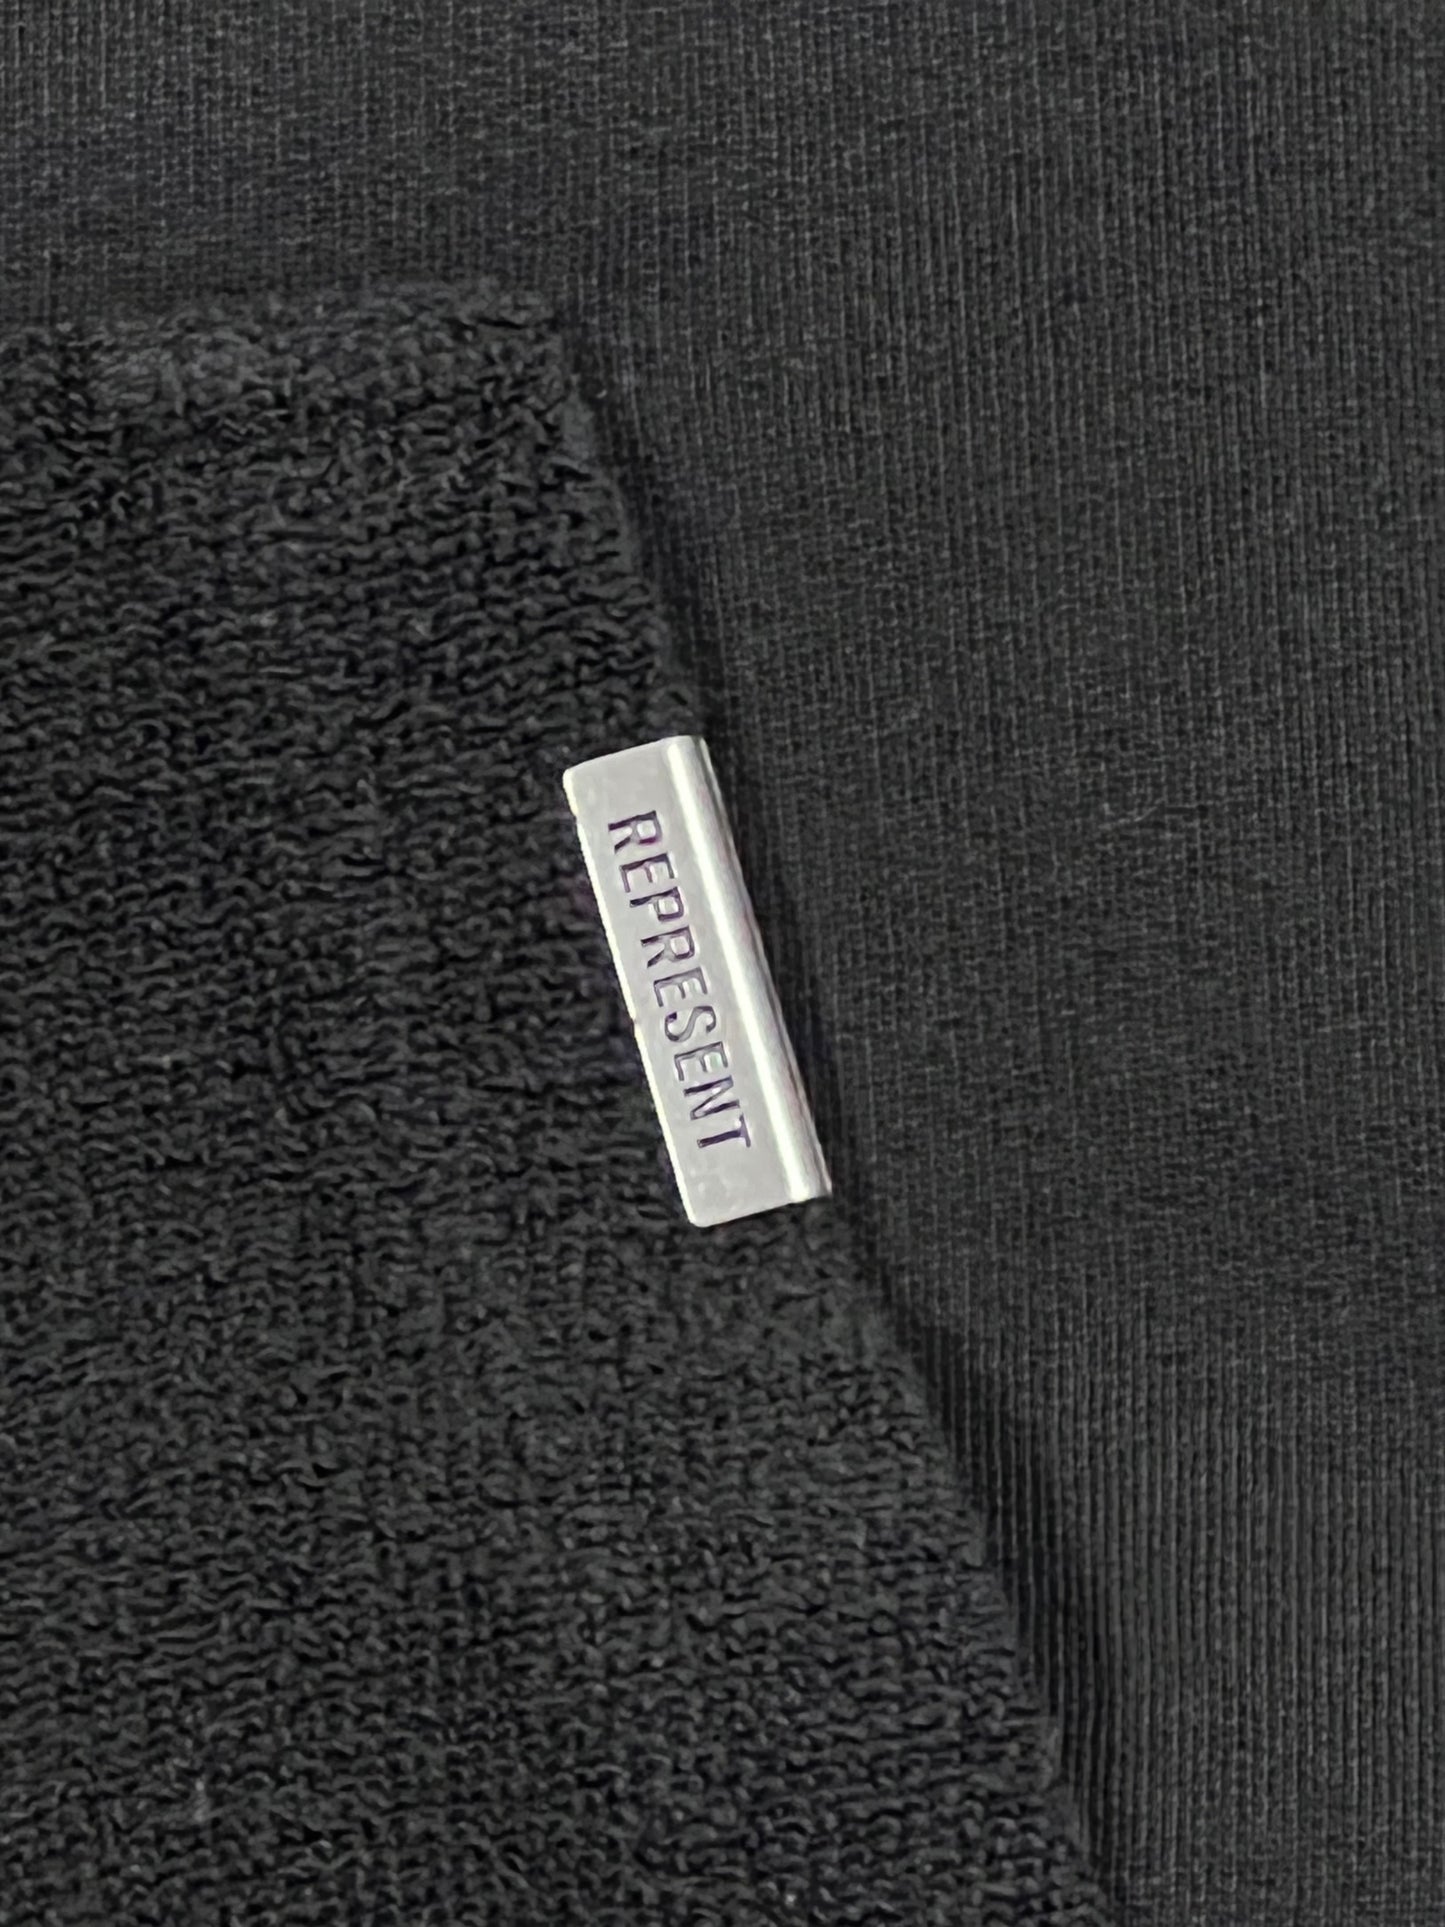 A close up of a REPRESENT M04216 INVERSE HOODIE OFF BLACK with a label on it.